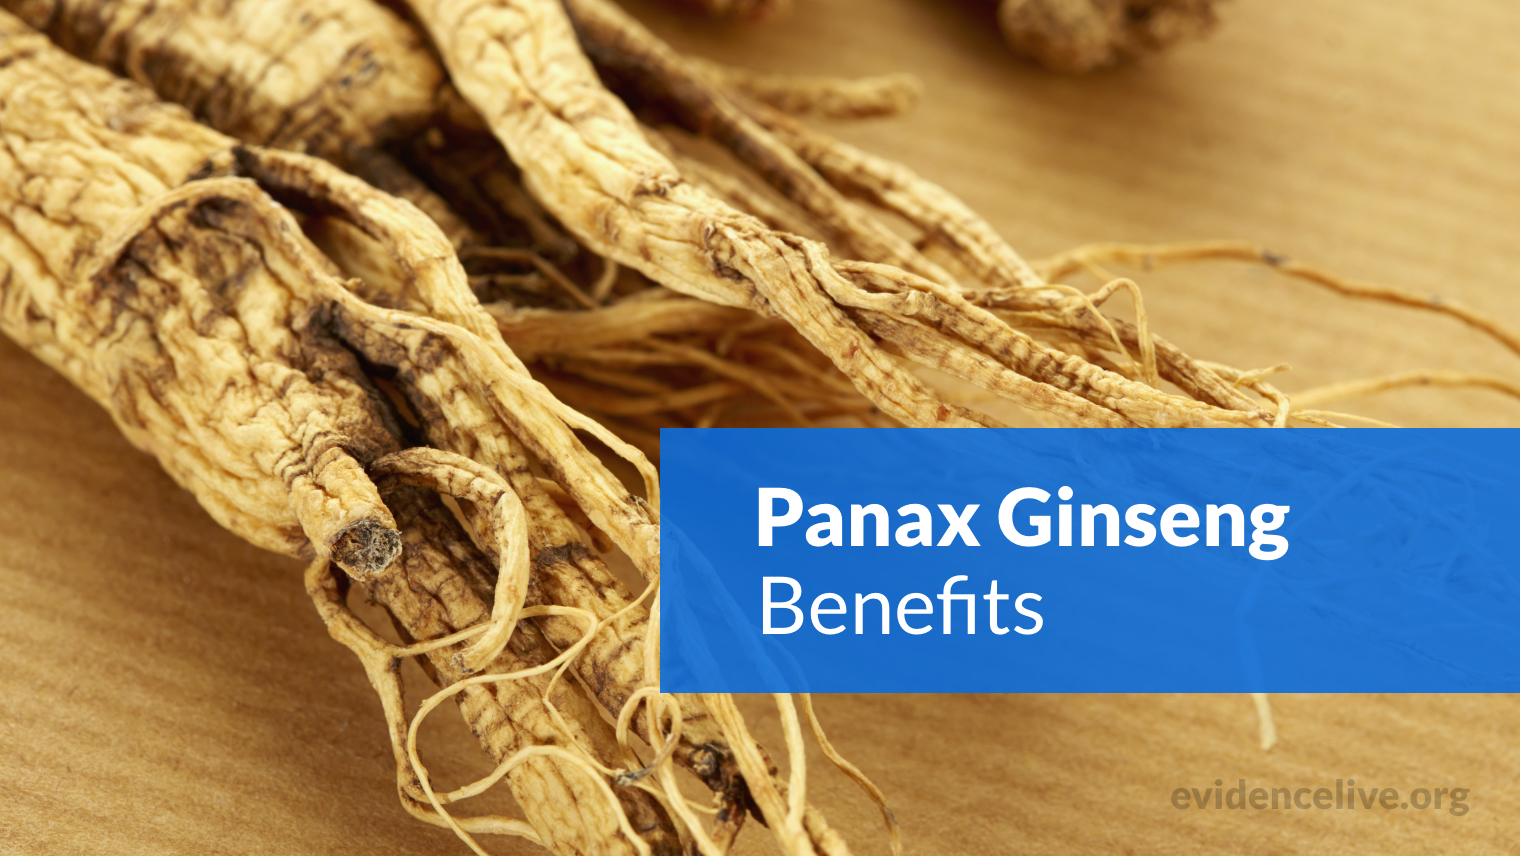 Panax Ginseng: Benefits, Uses, Dosage, and Side Effects